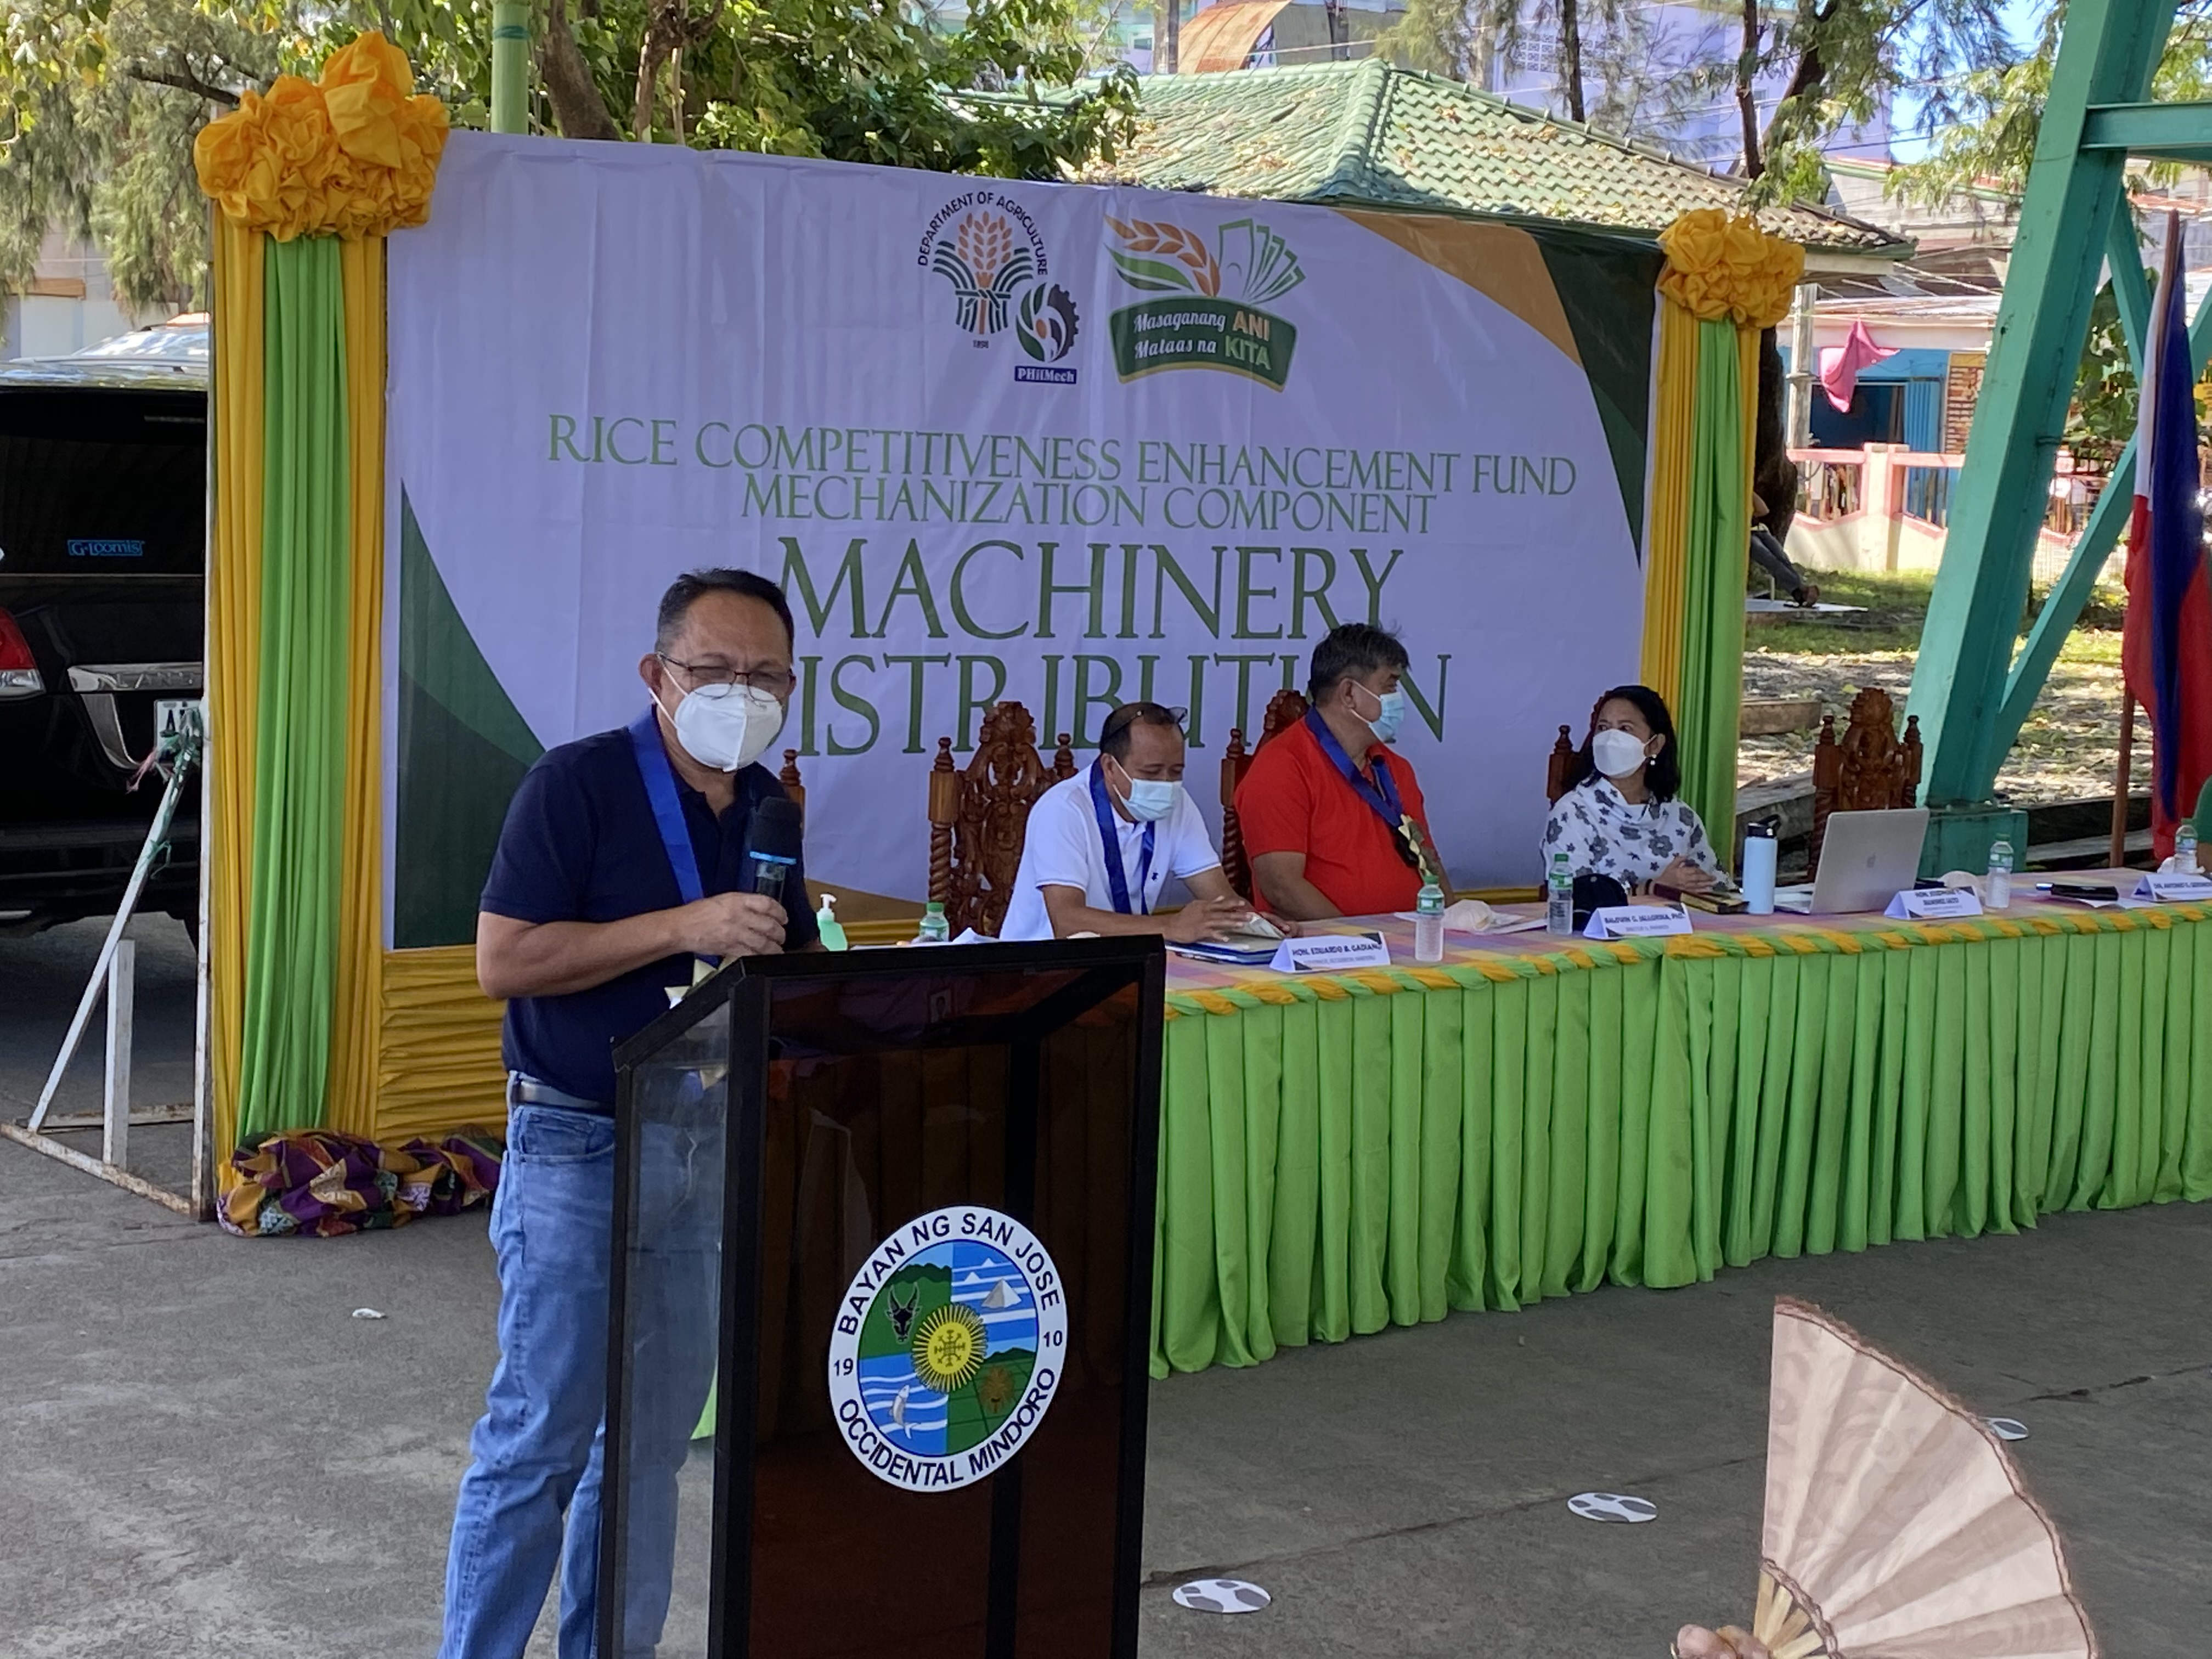 Philippine Center for Postharvest Development and Mechanization led the distribution of an estimated amount of Php 101,883,000.00 worth of farm machinery and equipment under the Rice Competitiveness Enhancement Fund (RCEF) Mechanization Component to 49 Farmers Cooperative and Association (FCAs) from 11 municipalities of Occidental Mindoro on November 19, 2020 at San Jose Covered Court, San Jose Occidental Mindoro. <br />Different Agri-Machinery grant includes Four Wheel Tractor, Hand Tractor, Floating Tiller, Walk-behind Transplanter, Riding-type Transplanter, Rice Reaper, Combine Harvester and Thresher.